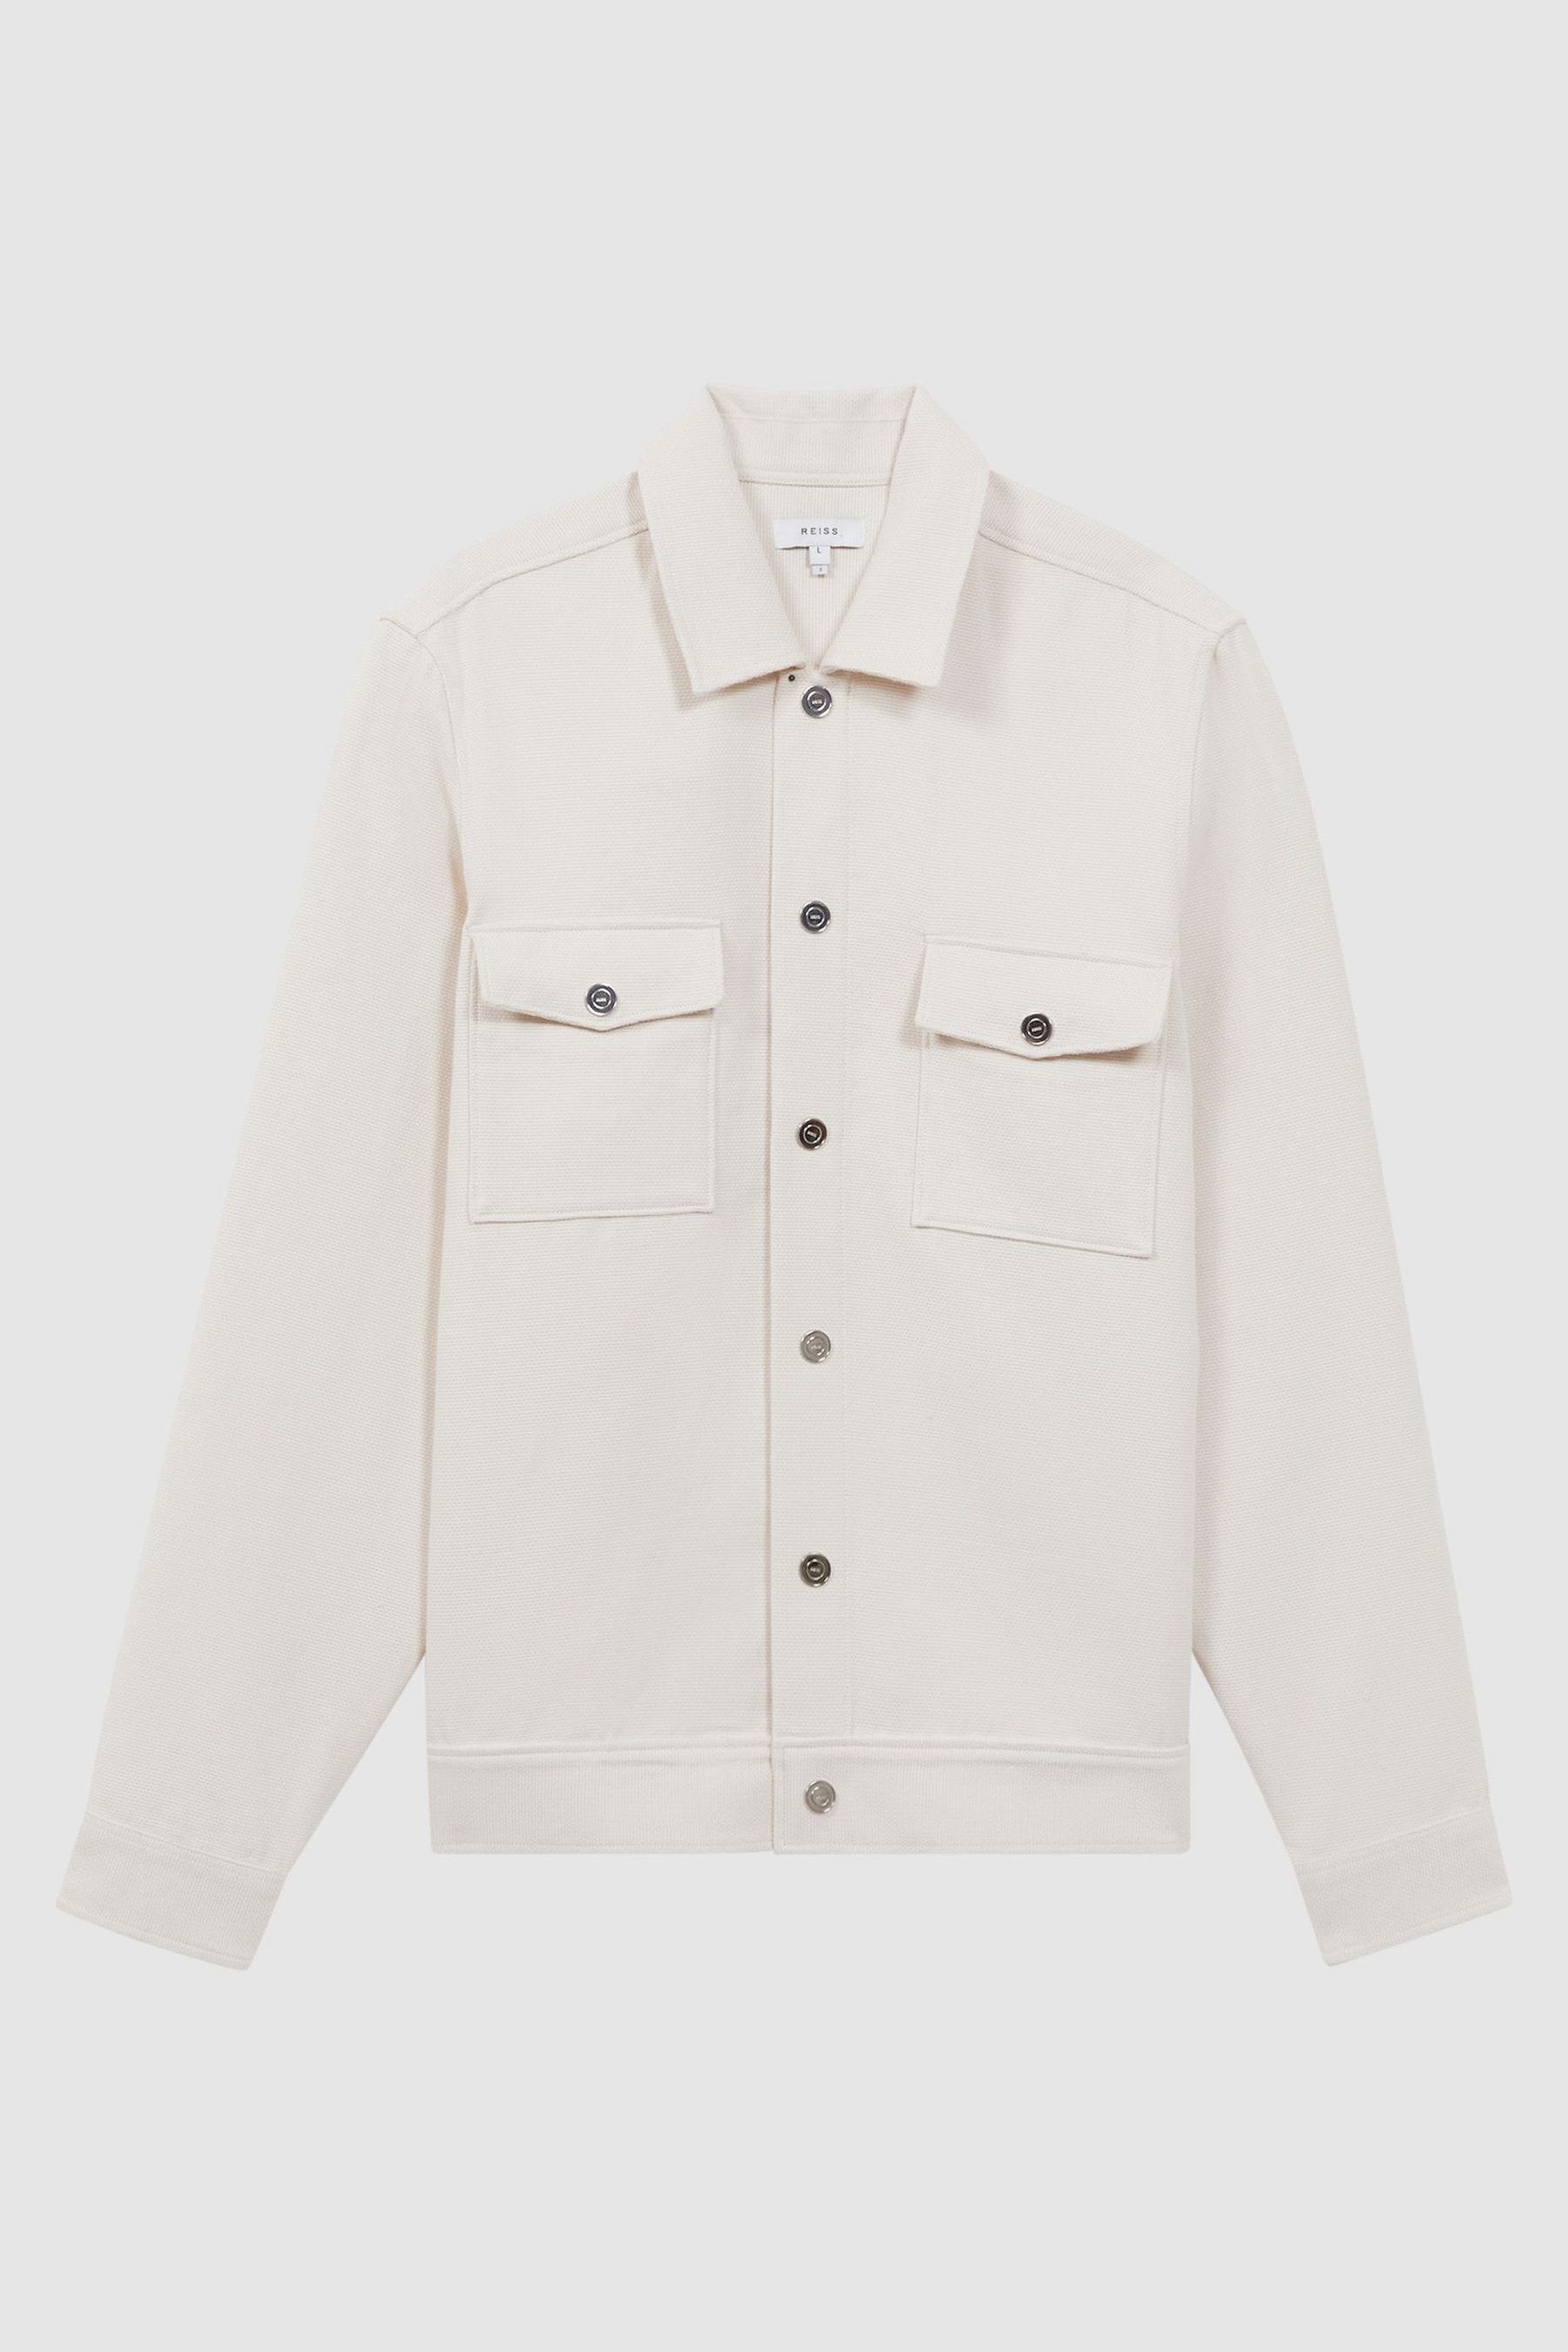 Buy Reiss Ecru Chez Textured Cotton Twin Pocket Overshirt from the Next ...